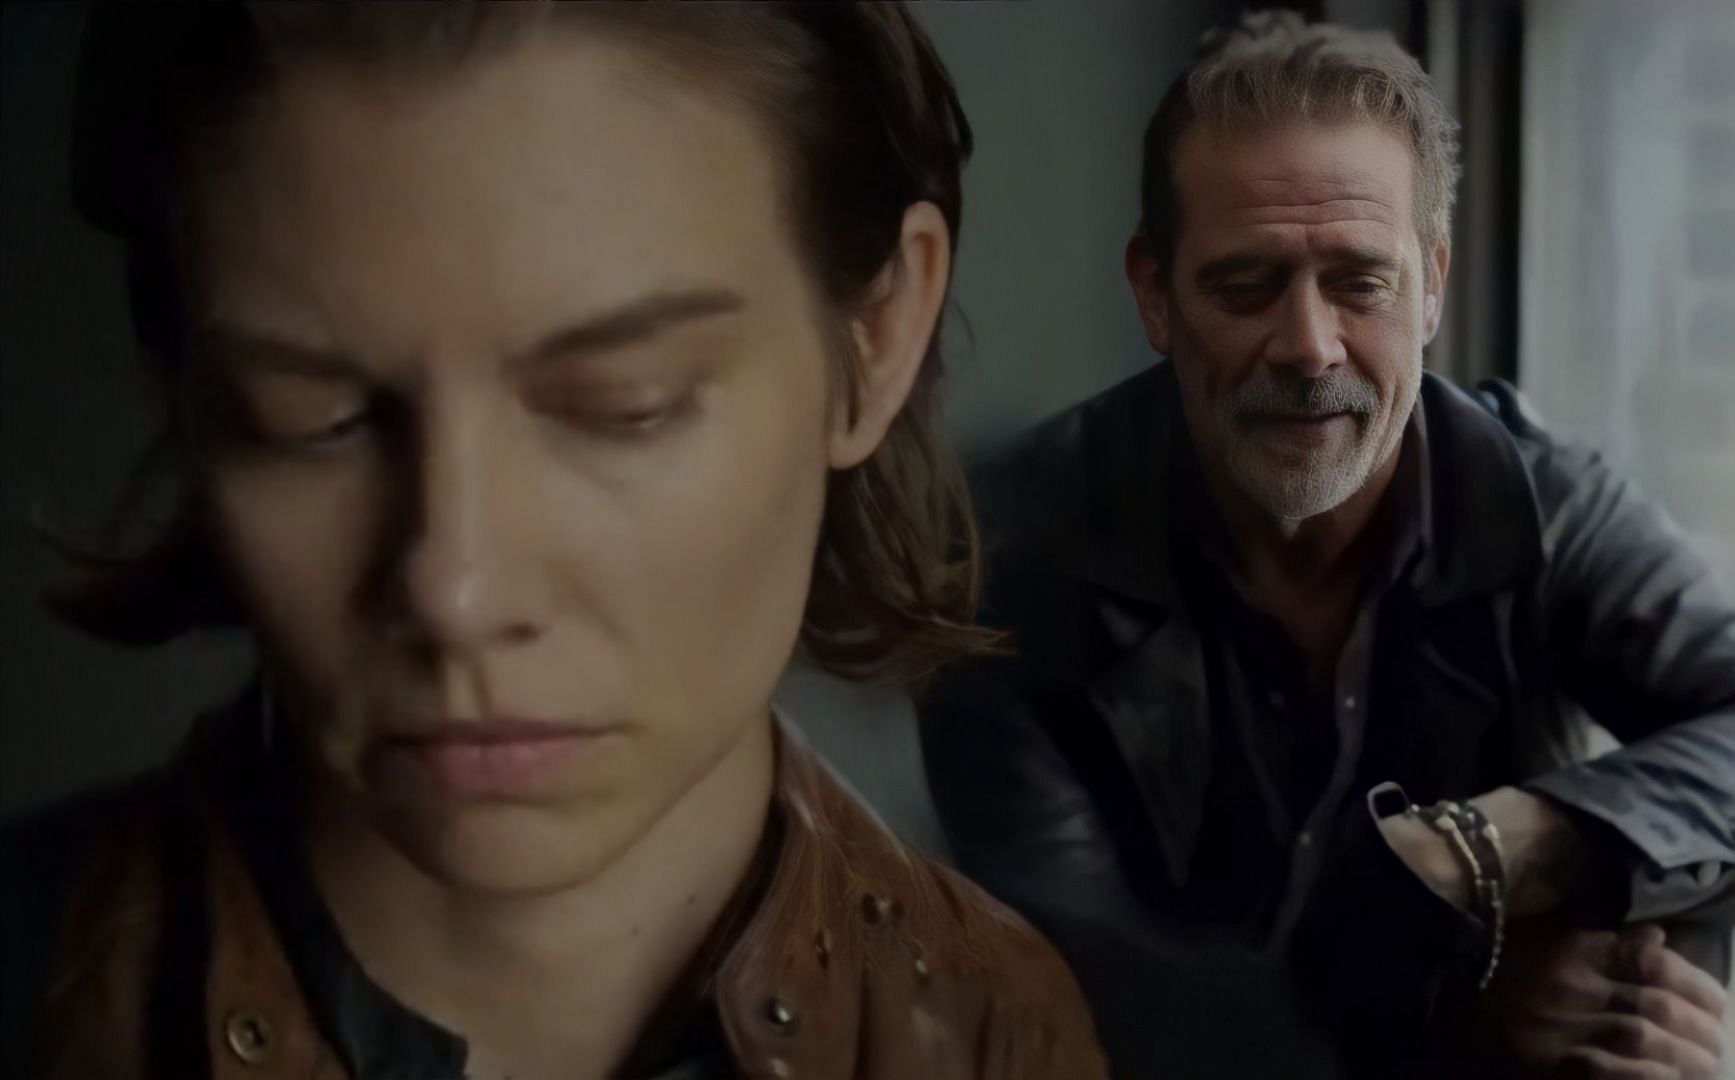 Maggie Greene and her husband&rsquo;s killer Negan Smith are back in Dead City. (Photo via Twitter/@ixholmes)